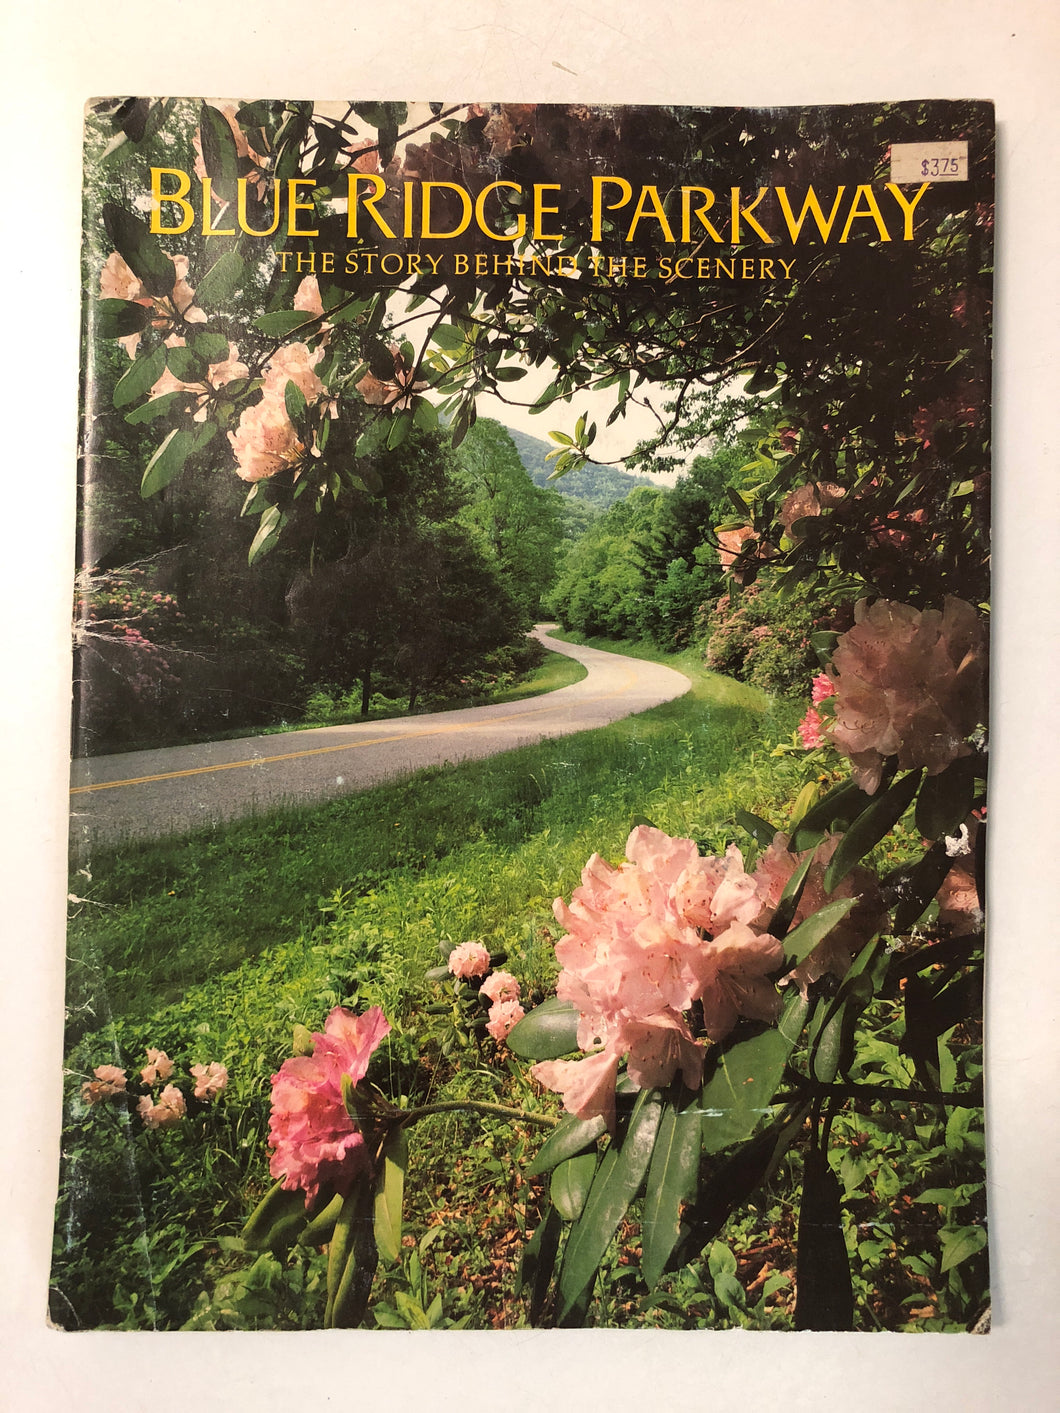 Blue Ridge Parkway The Story Behind the Scenery - Slick Cat Books 